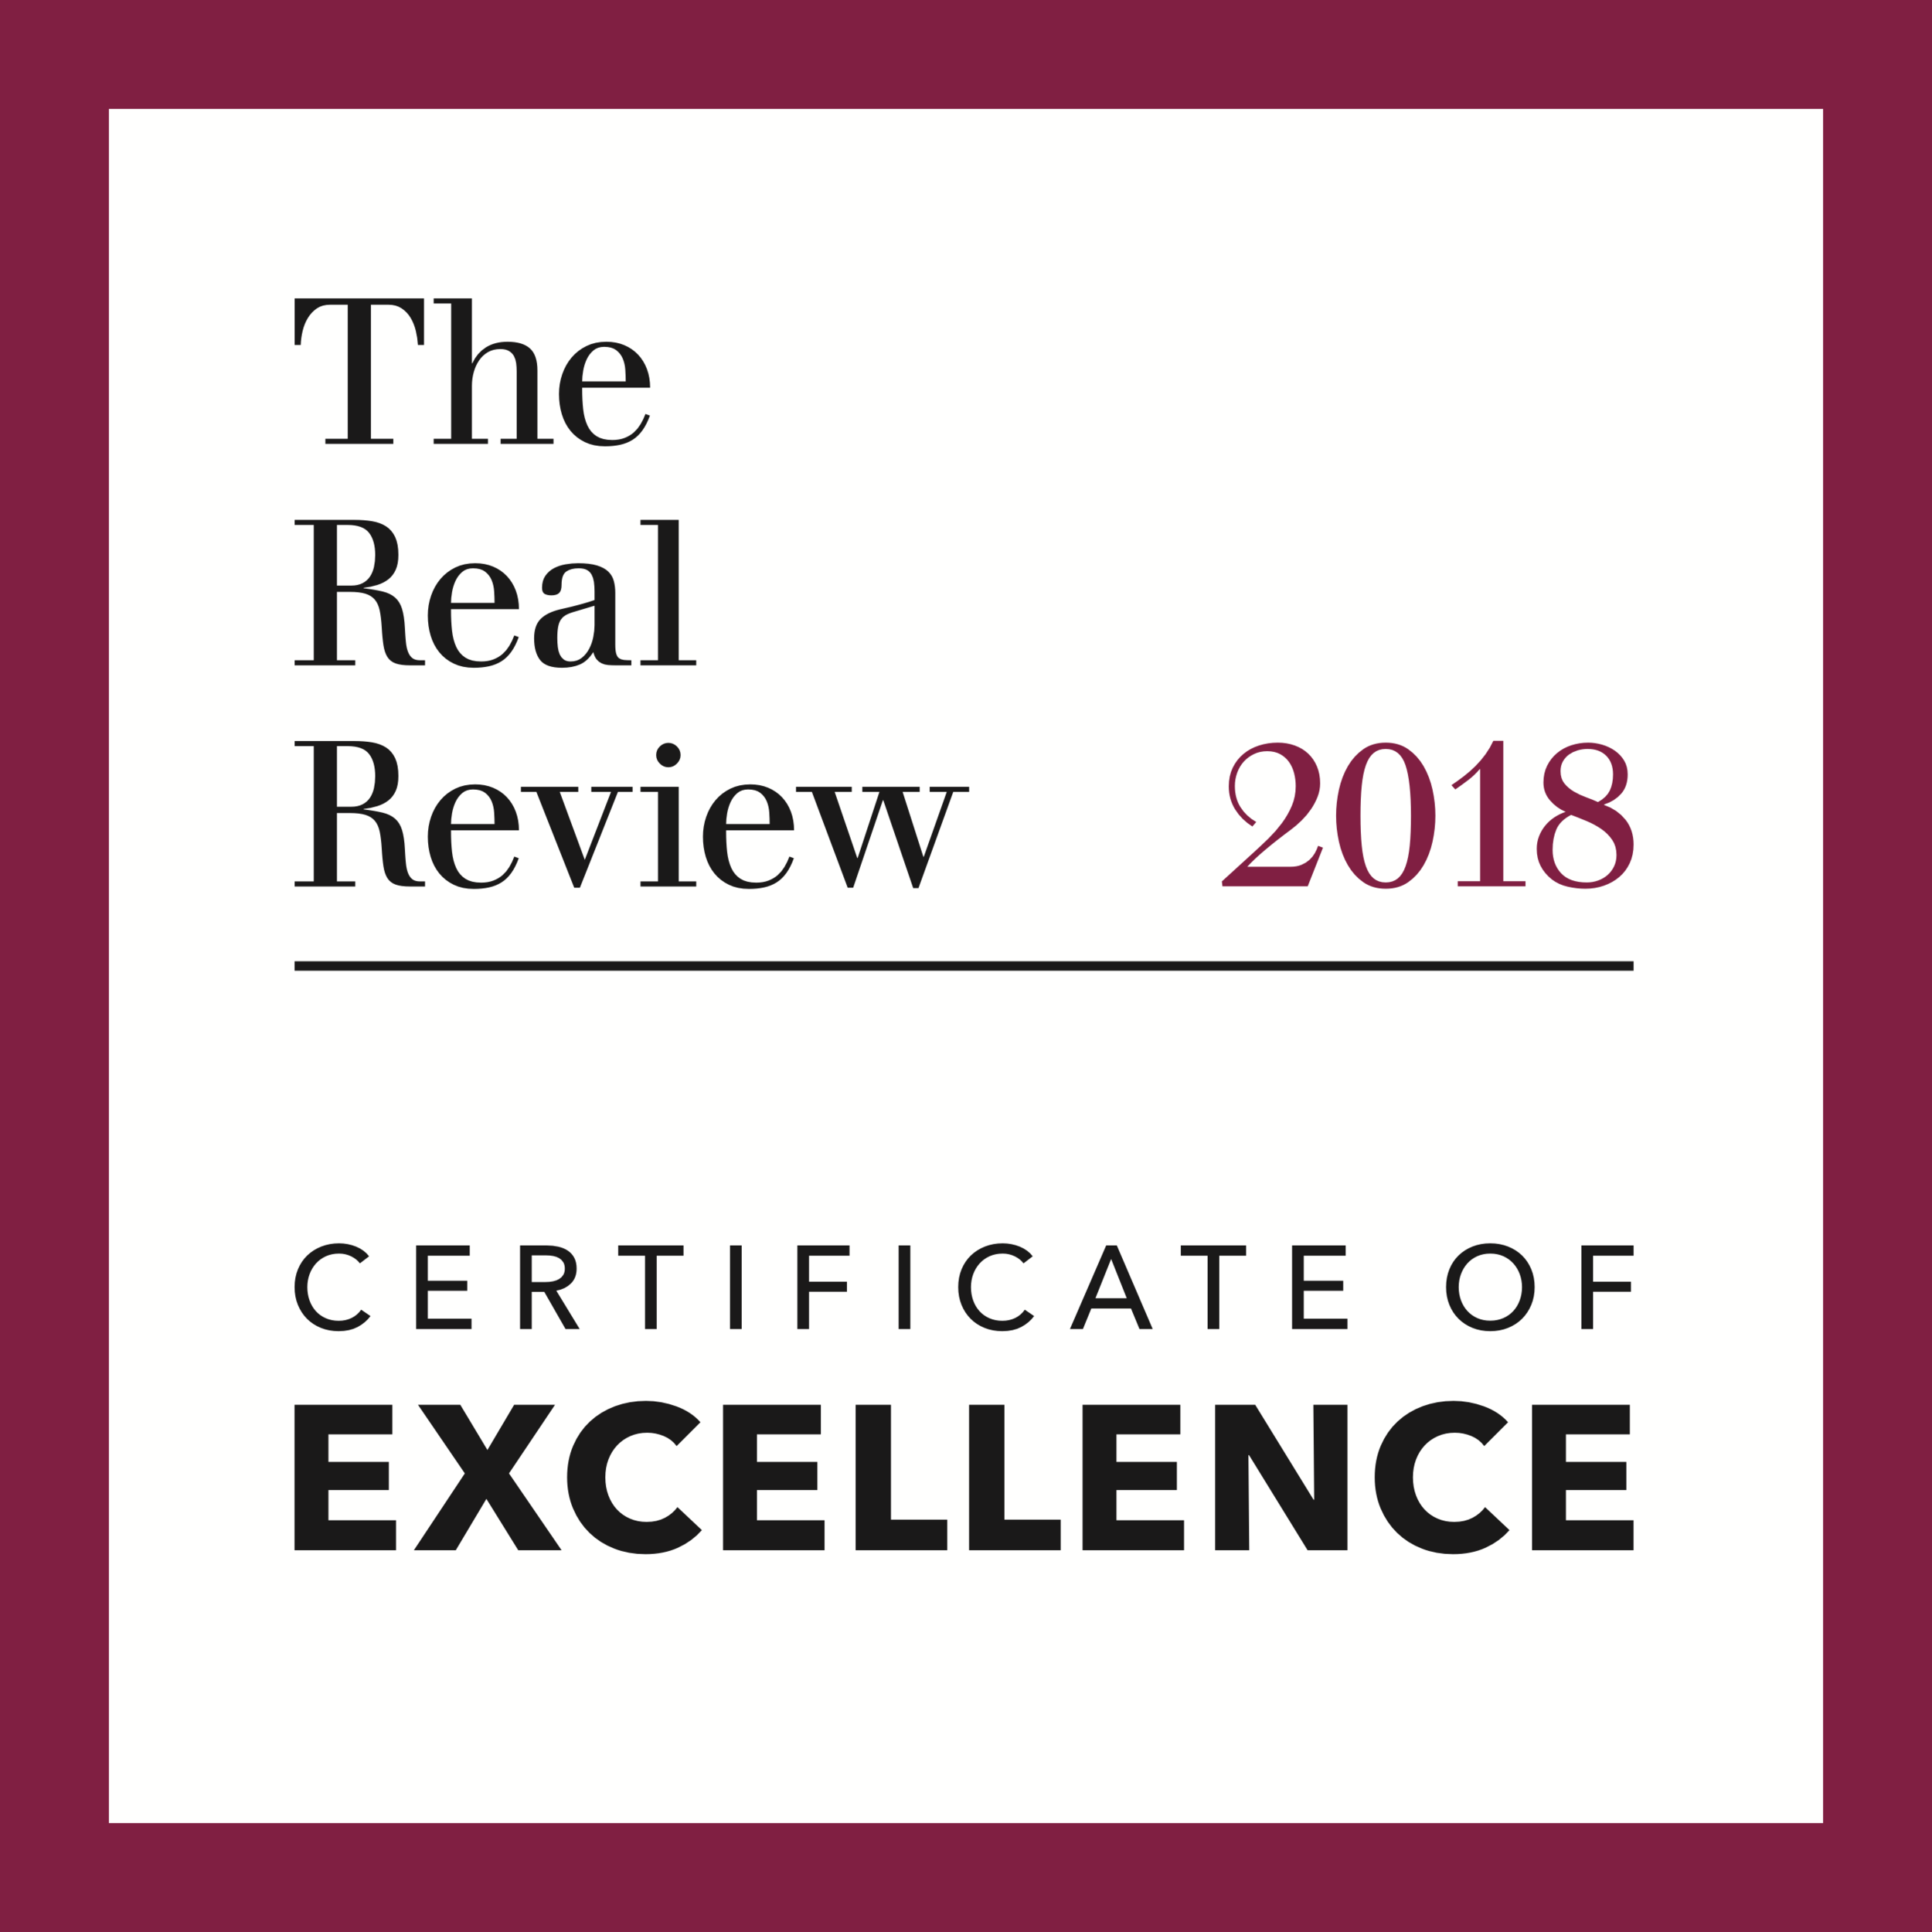 certificateofexcellence-2018-print.png